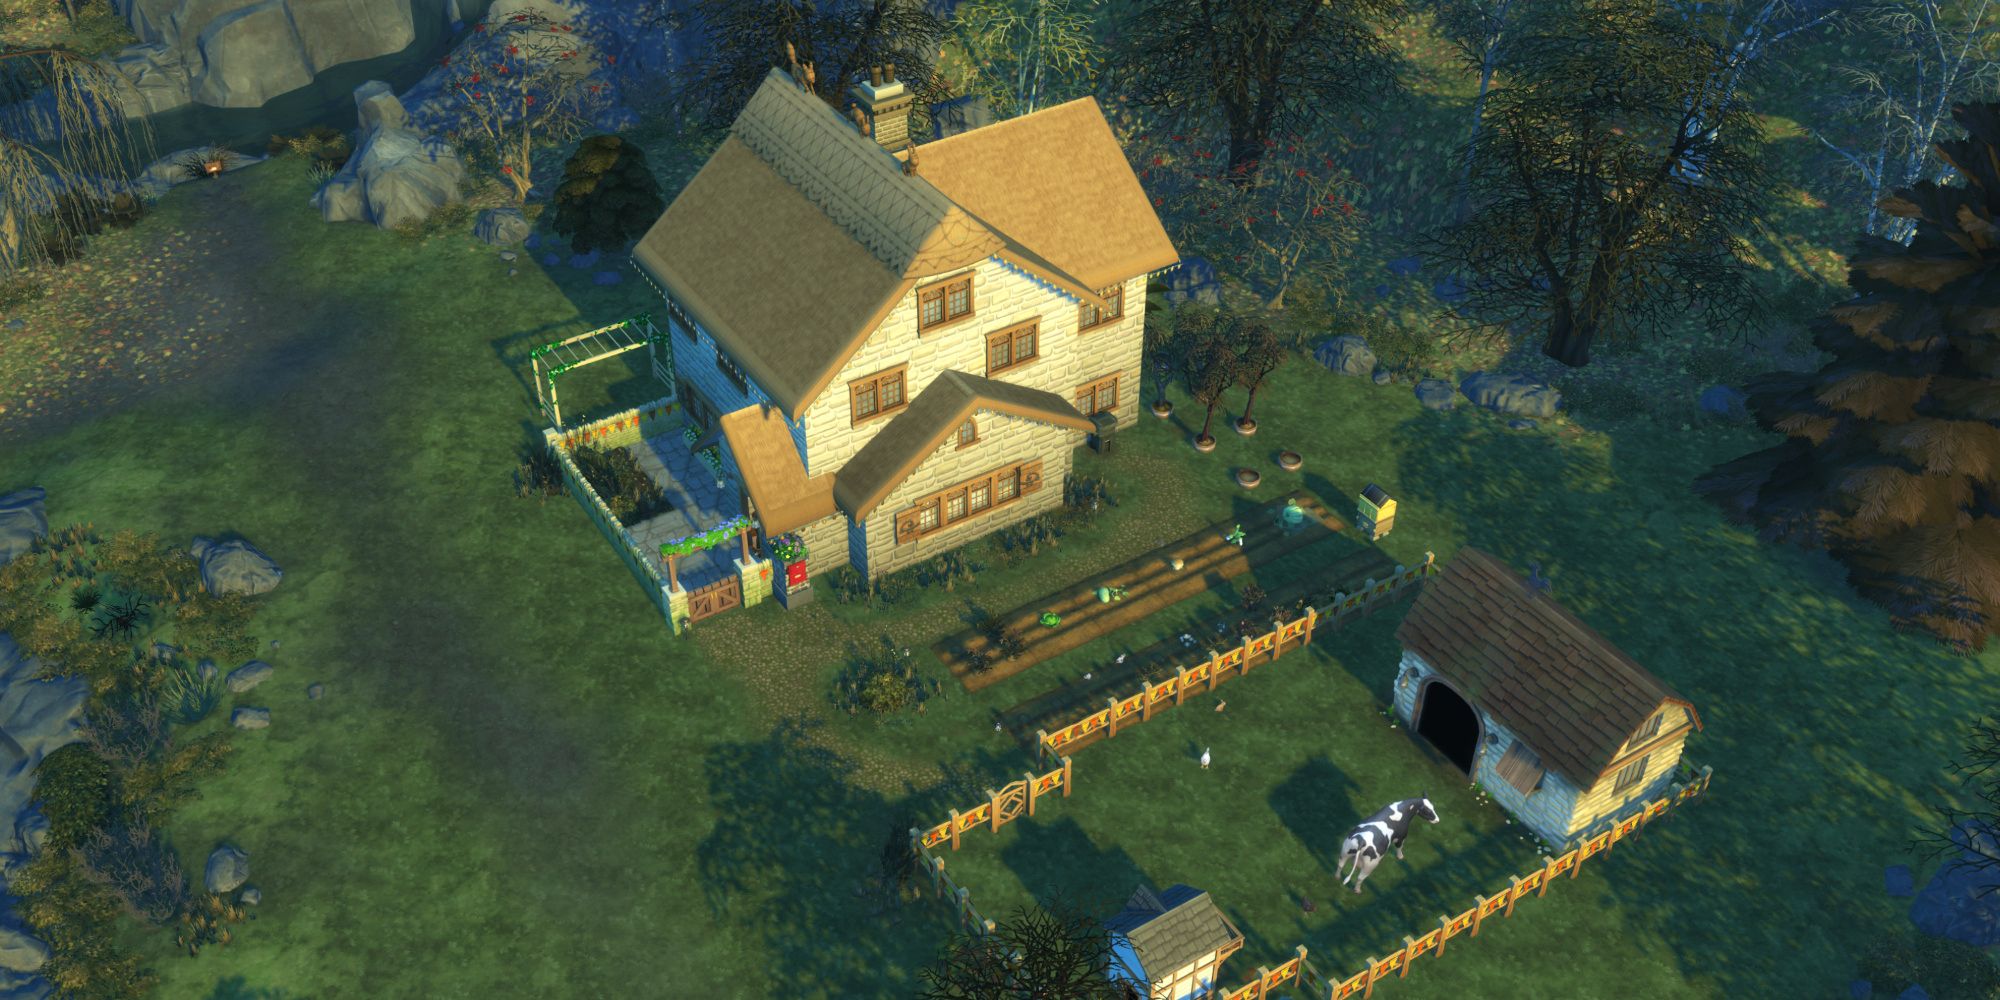 A country farmhouse in The Sims 4